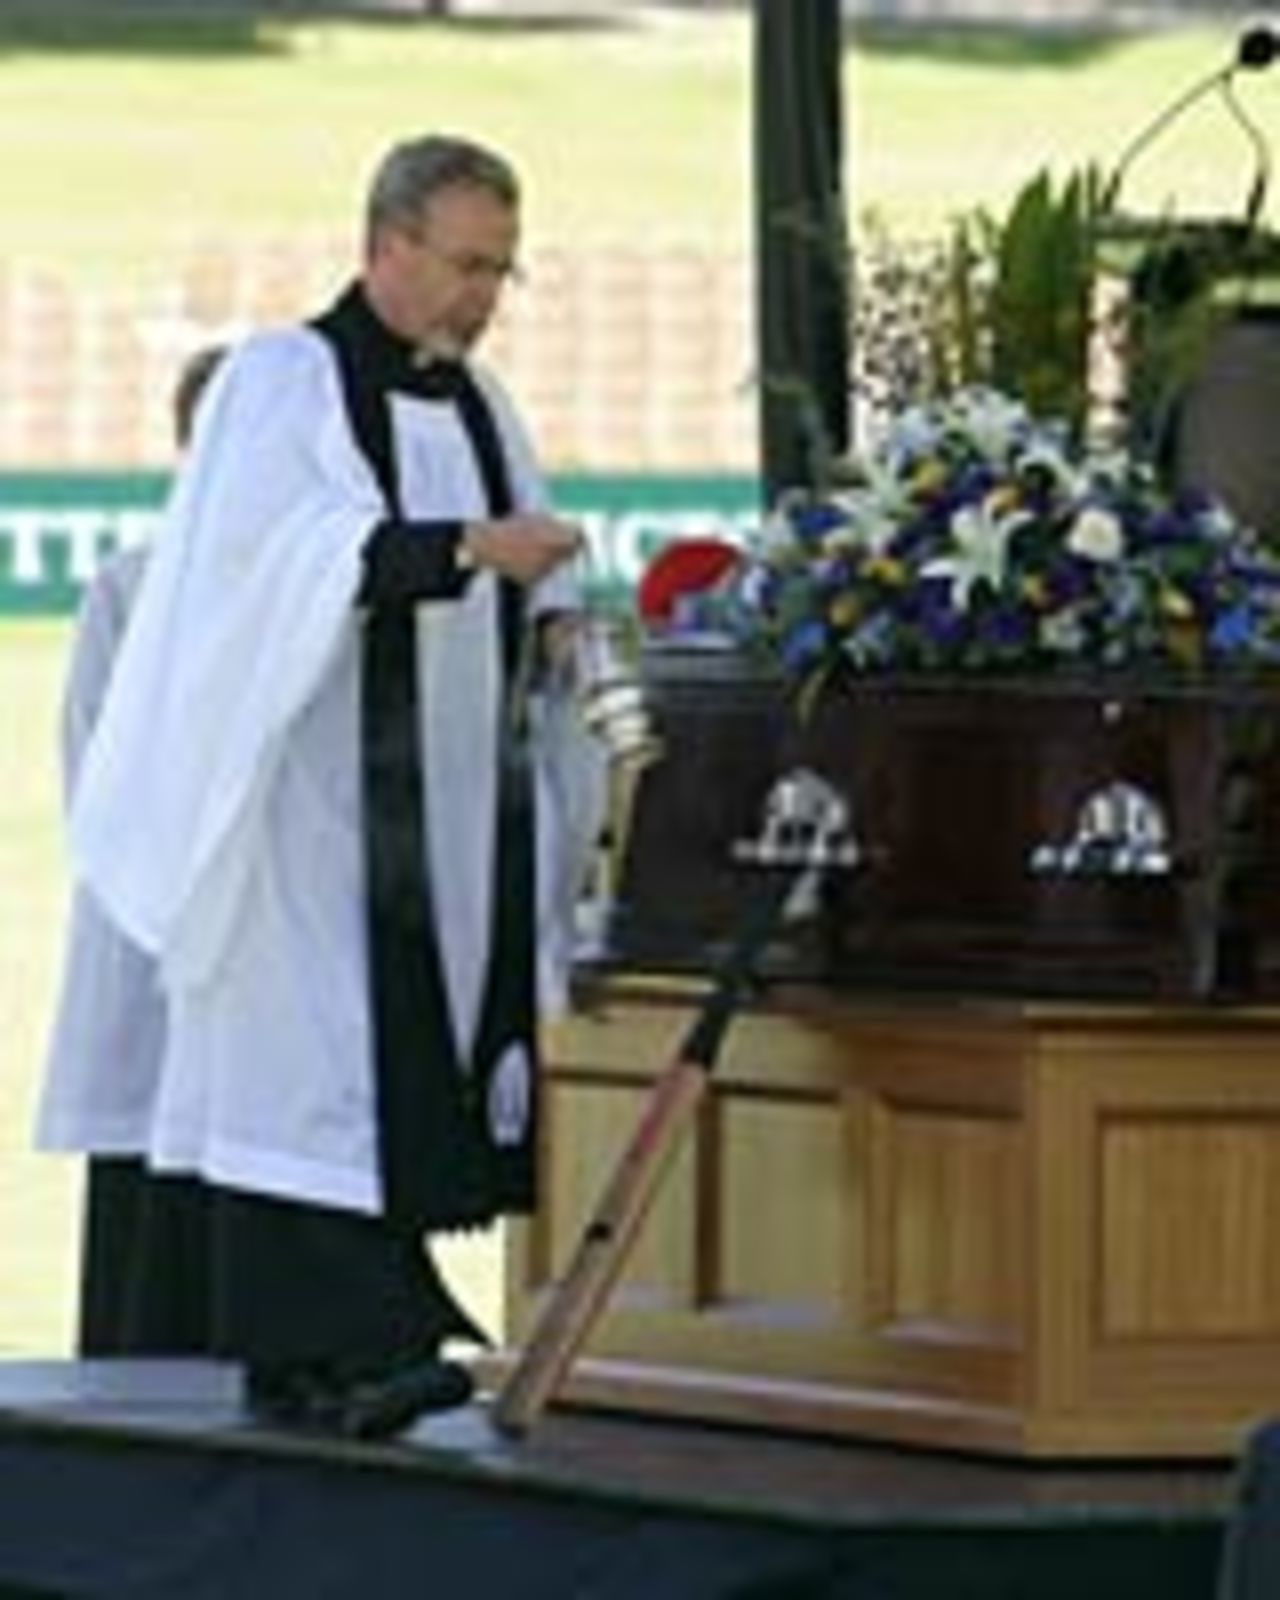 A cricket bat rests next to the coffin of David Hookes, January 27, 2004